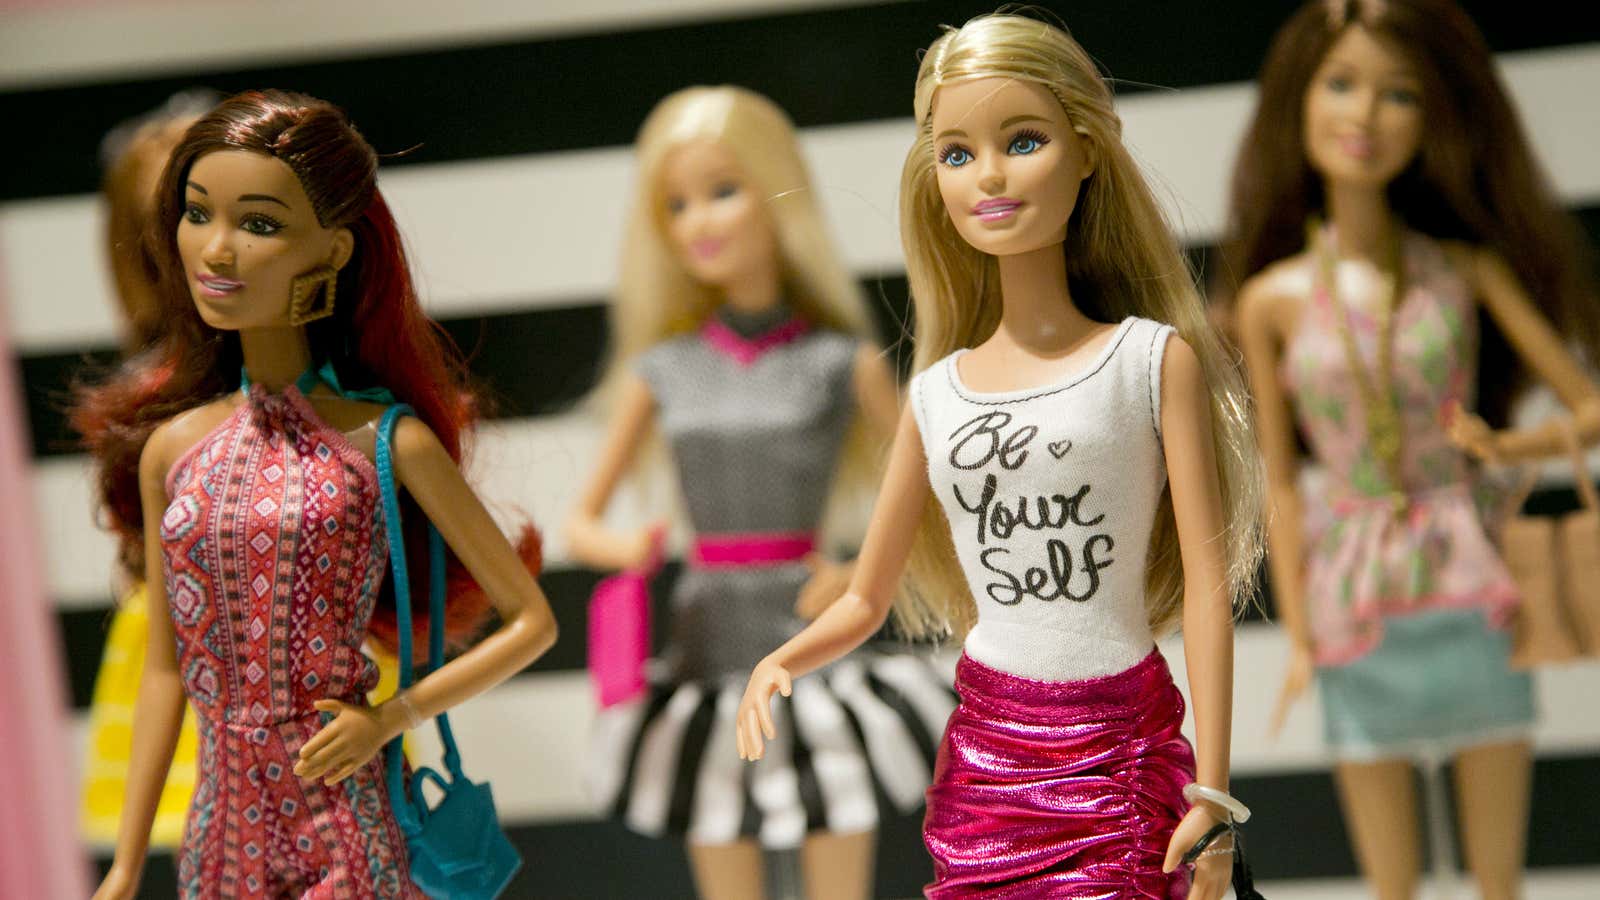 Barbie thinks you’re beautiful—just the way you are.